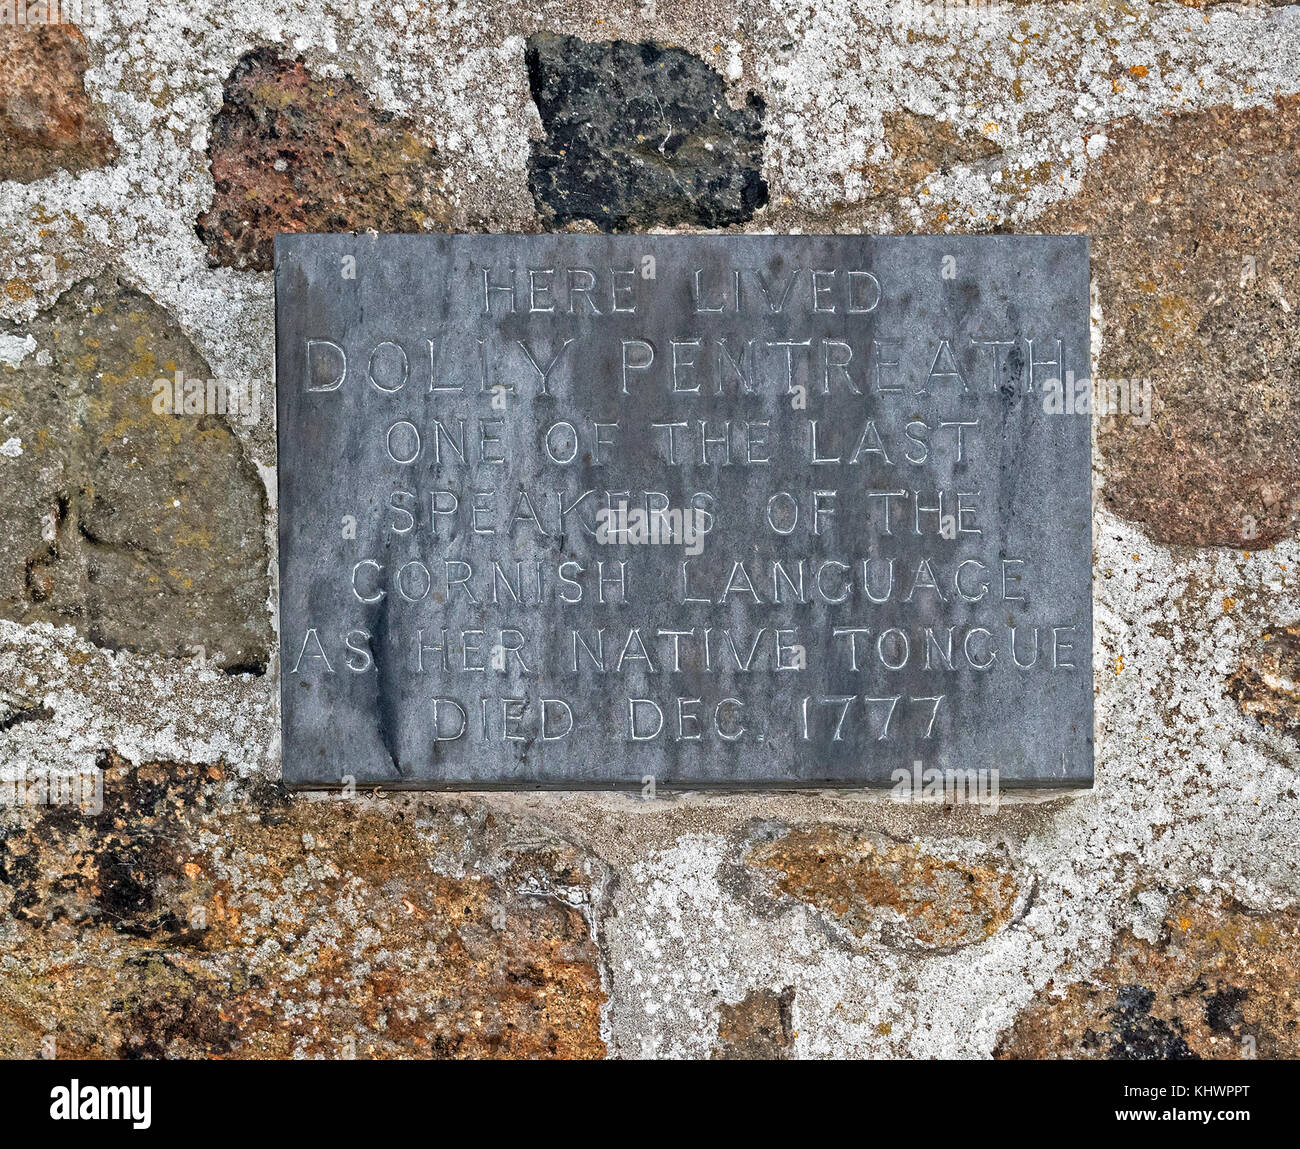 a memorial plaque on the home of Dolly Pentreath on of the last speakers of the cornish language as her native tongue, died december 1777. Stock Photo